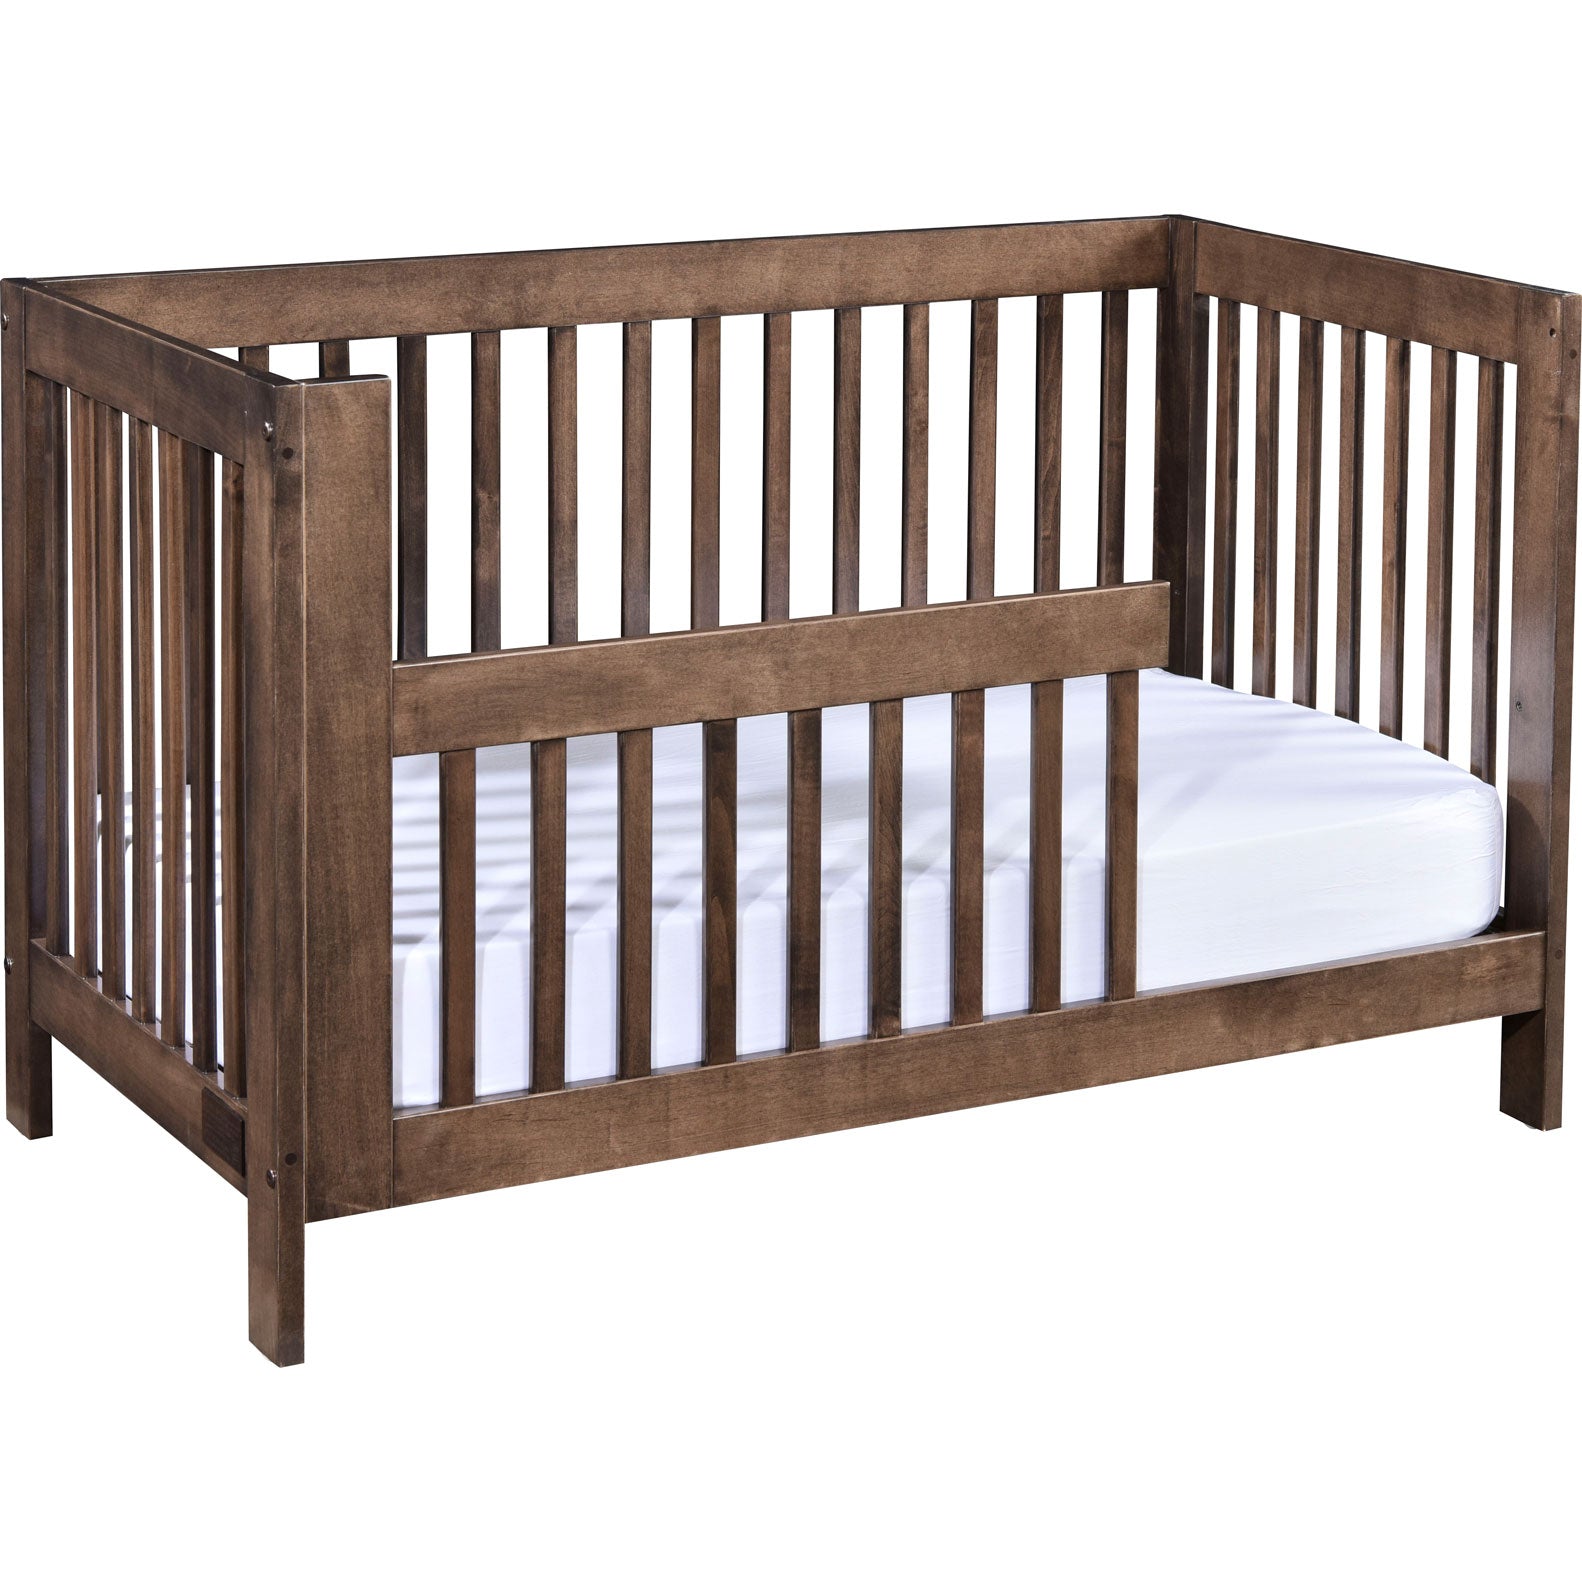 Prudence Crib Safety Rail for Toddler Bed - snyders.furniture